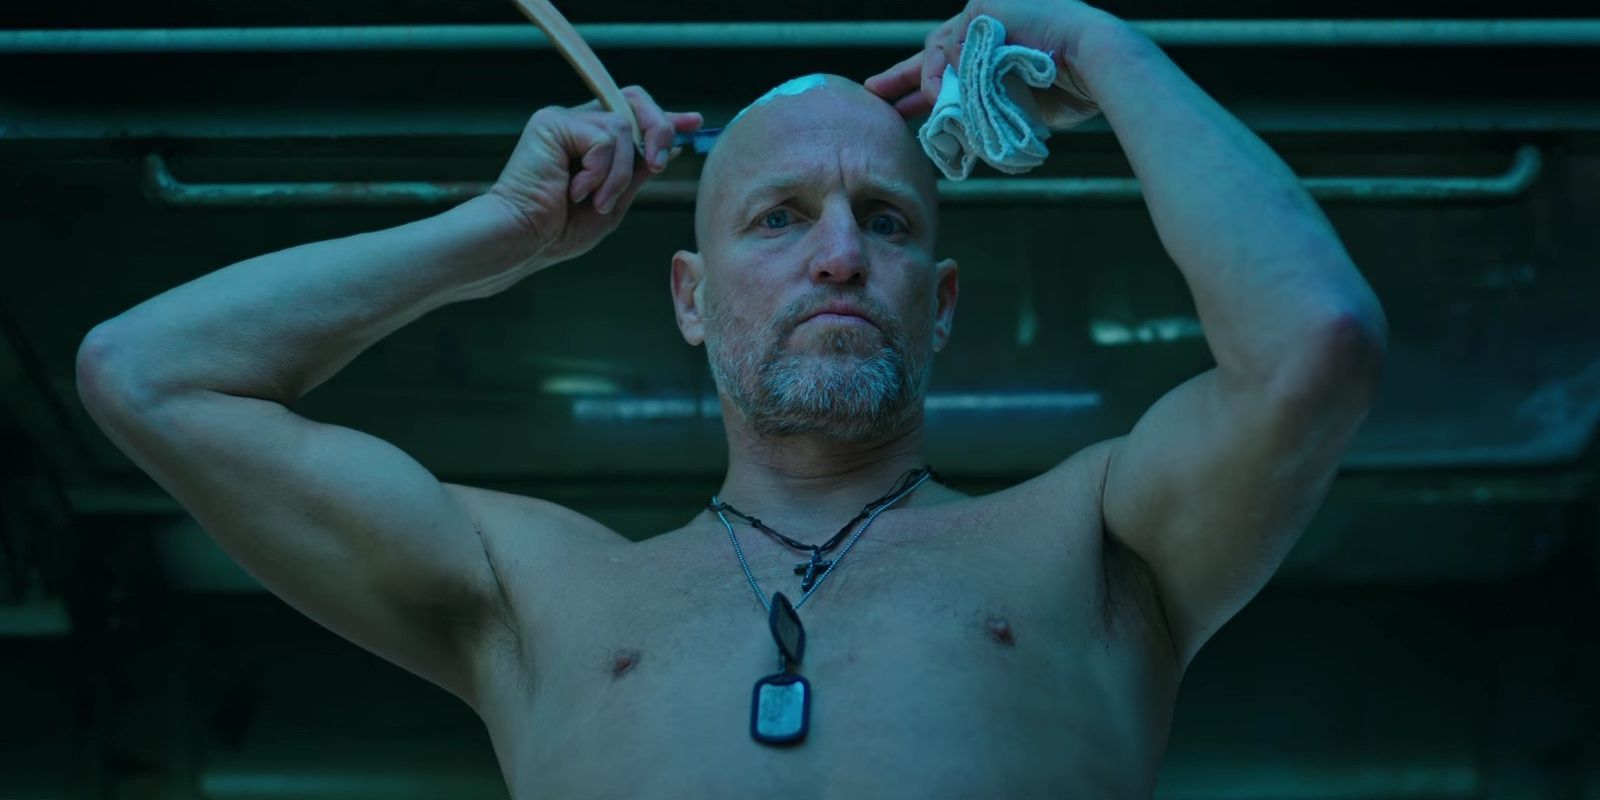 Woody Harrelson shaving his head in the War for the Planet of the Apes trailer